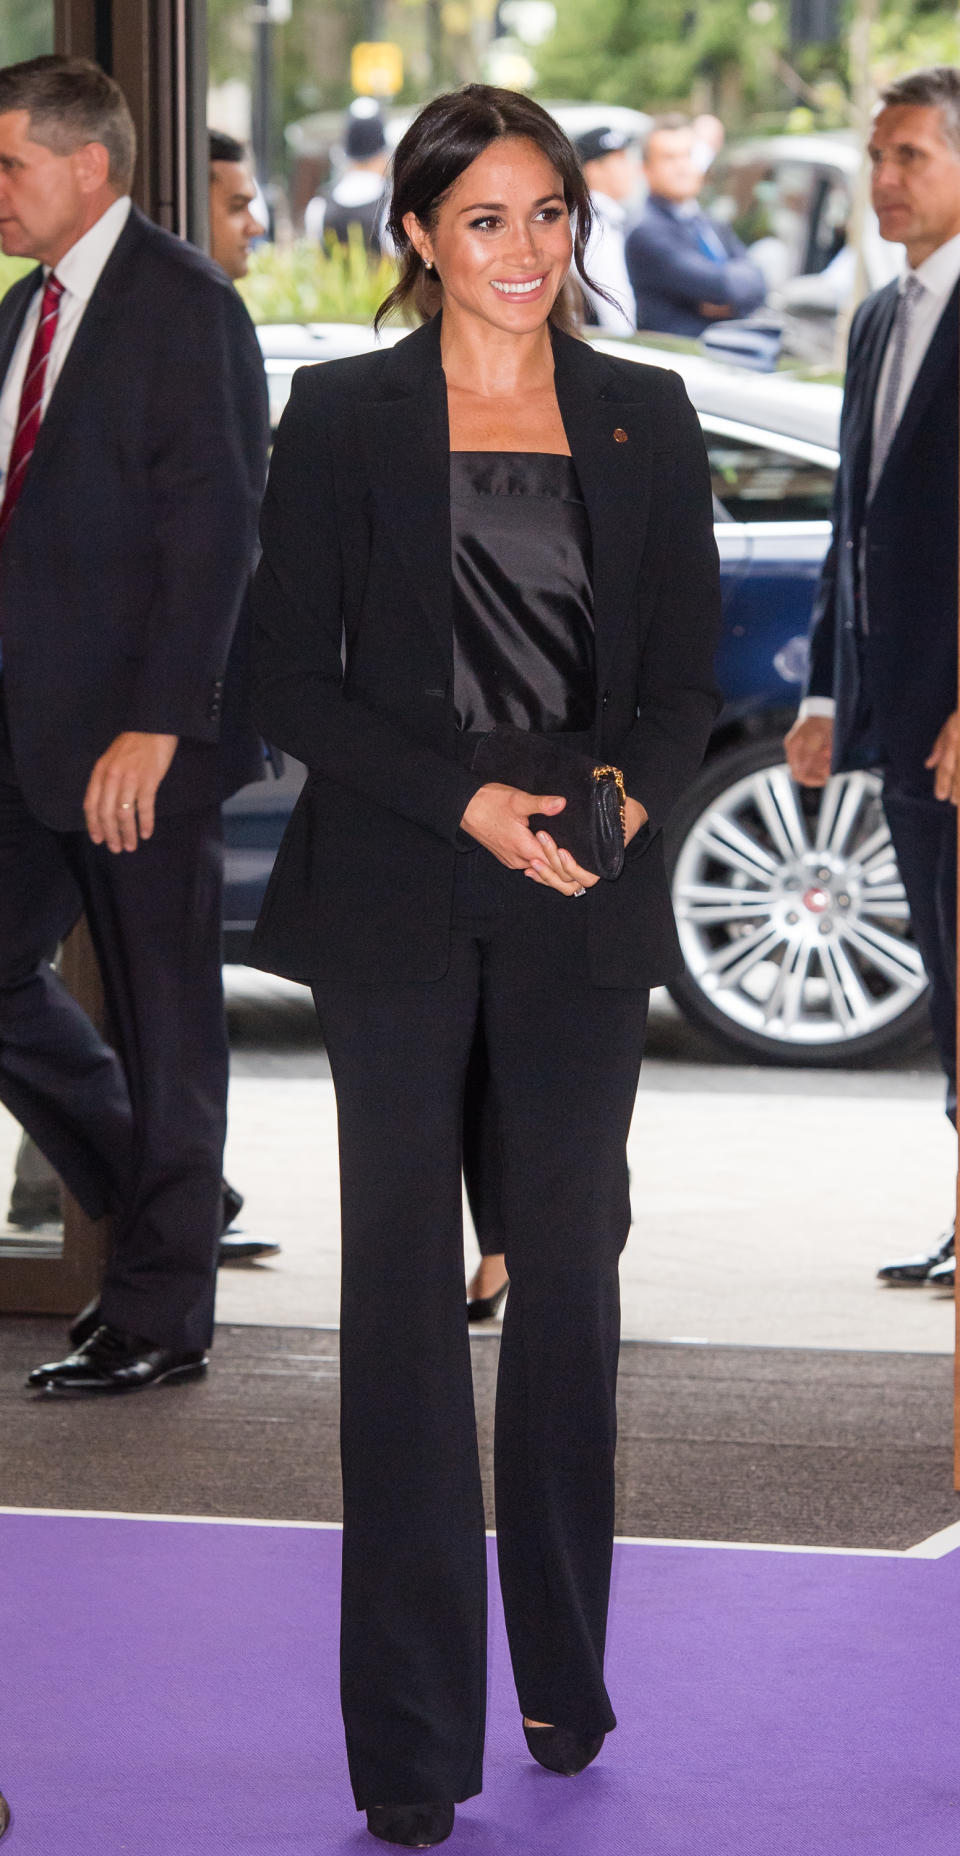 For the WellChild Awards 2018, the Duchess of Sussex wore a black suit by Altuzarra [Photo: Getty]